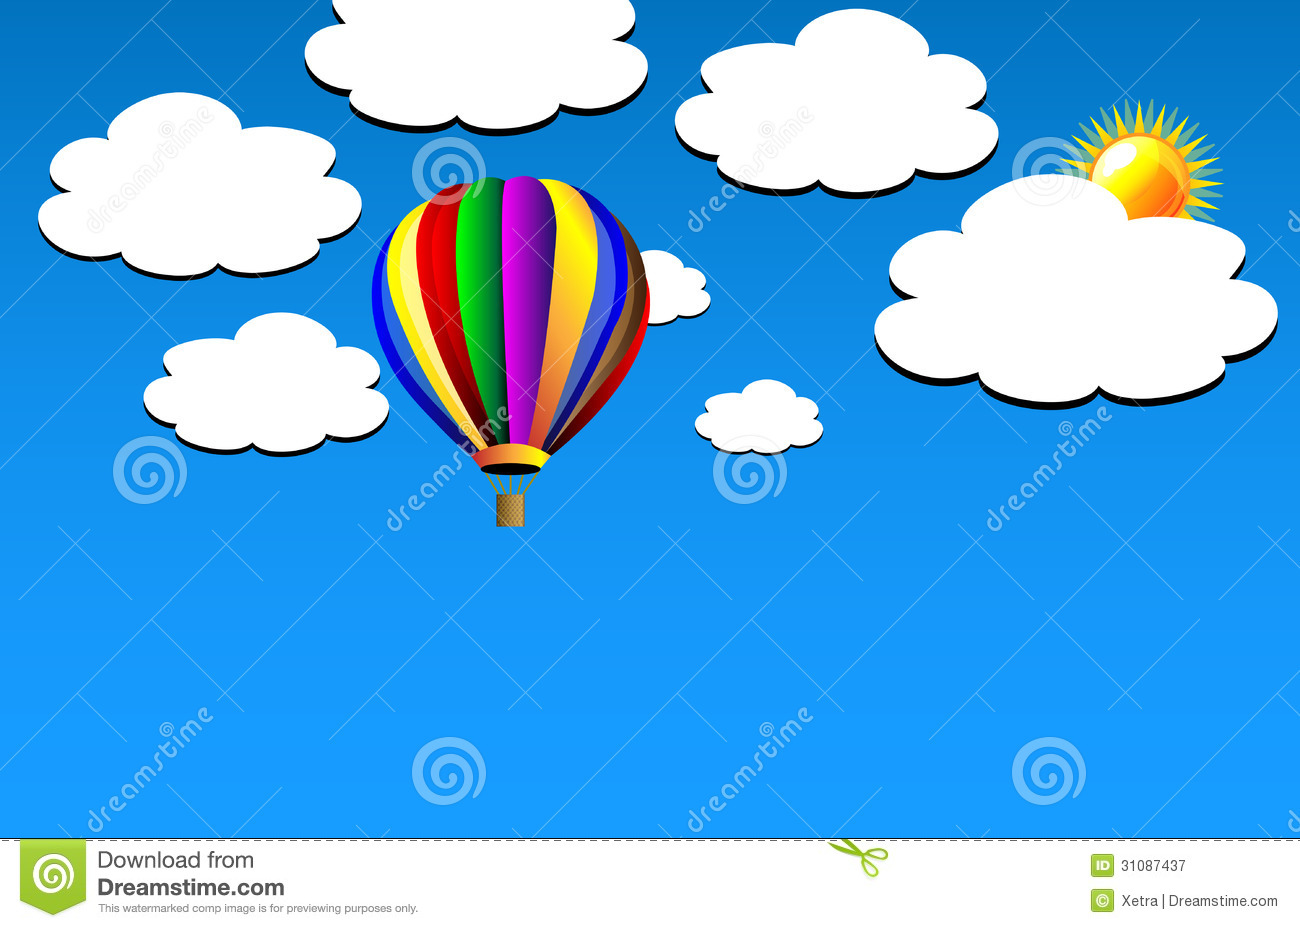 Hot Air Balloons In The Sky.